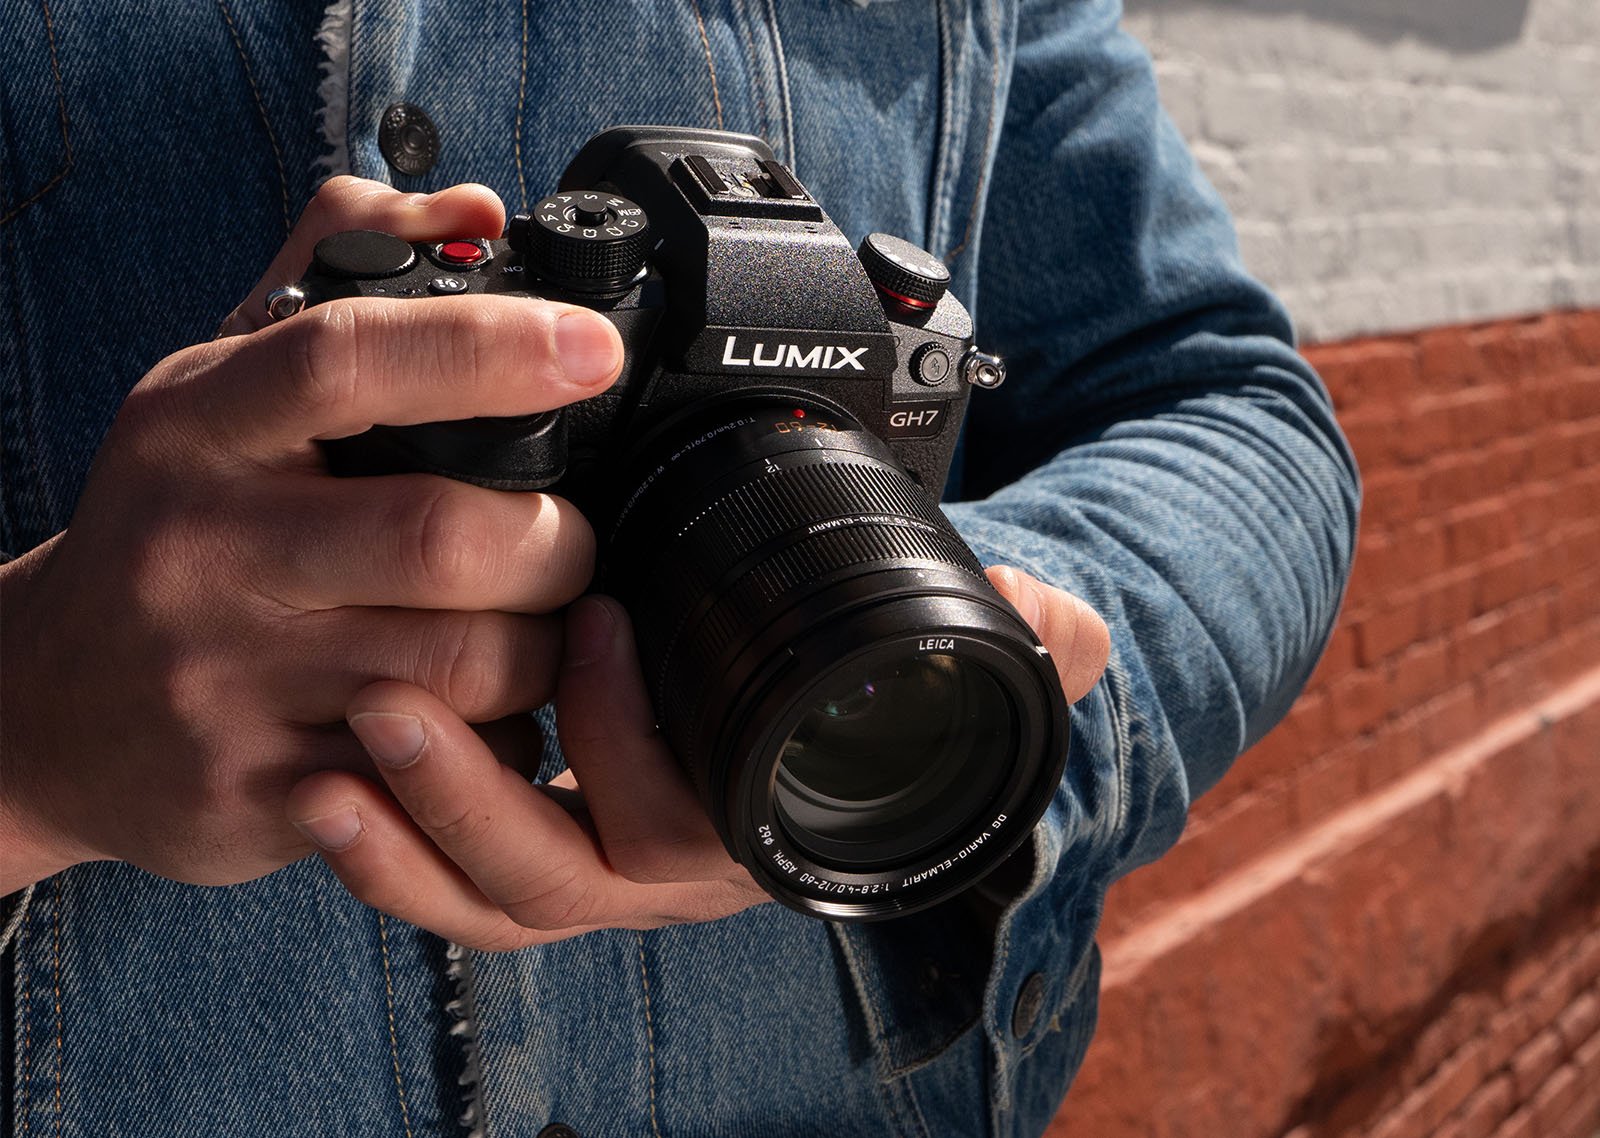 A person in a denim jacket holds a black Lumix GH7 camera with both hands against a background of a red and white brick wall. The camera is equipped with a large lens.